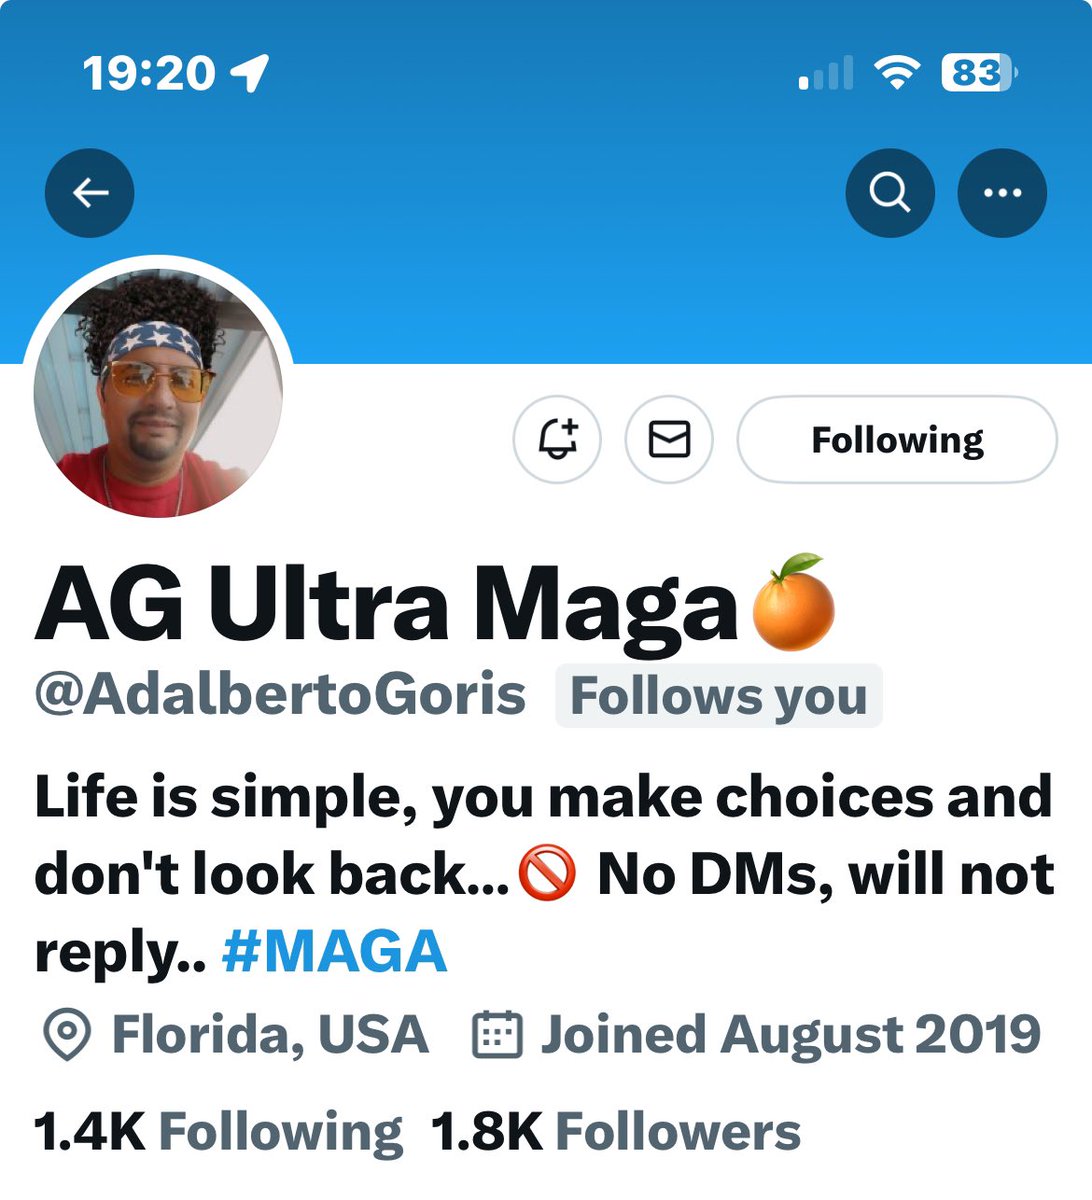 Family, meet Adalberto. @AdalbertoGoris I have a handful of Patriots that consistently interact with my post. He is as MAGA as they come, his content is relevant. He is sooo close to 2K followers. Let’s get this Patriot there. Thanks! 👊👊 #MAGA